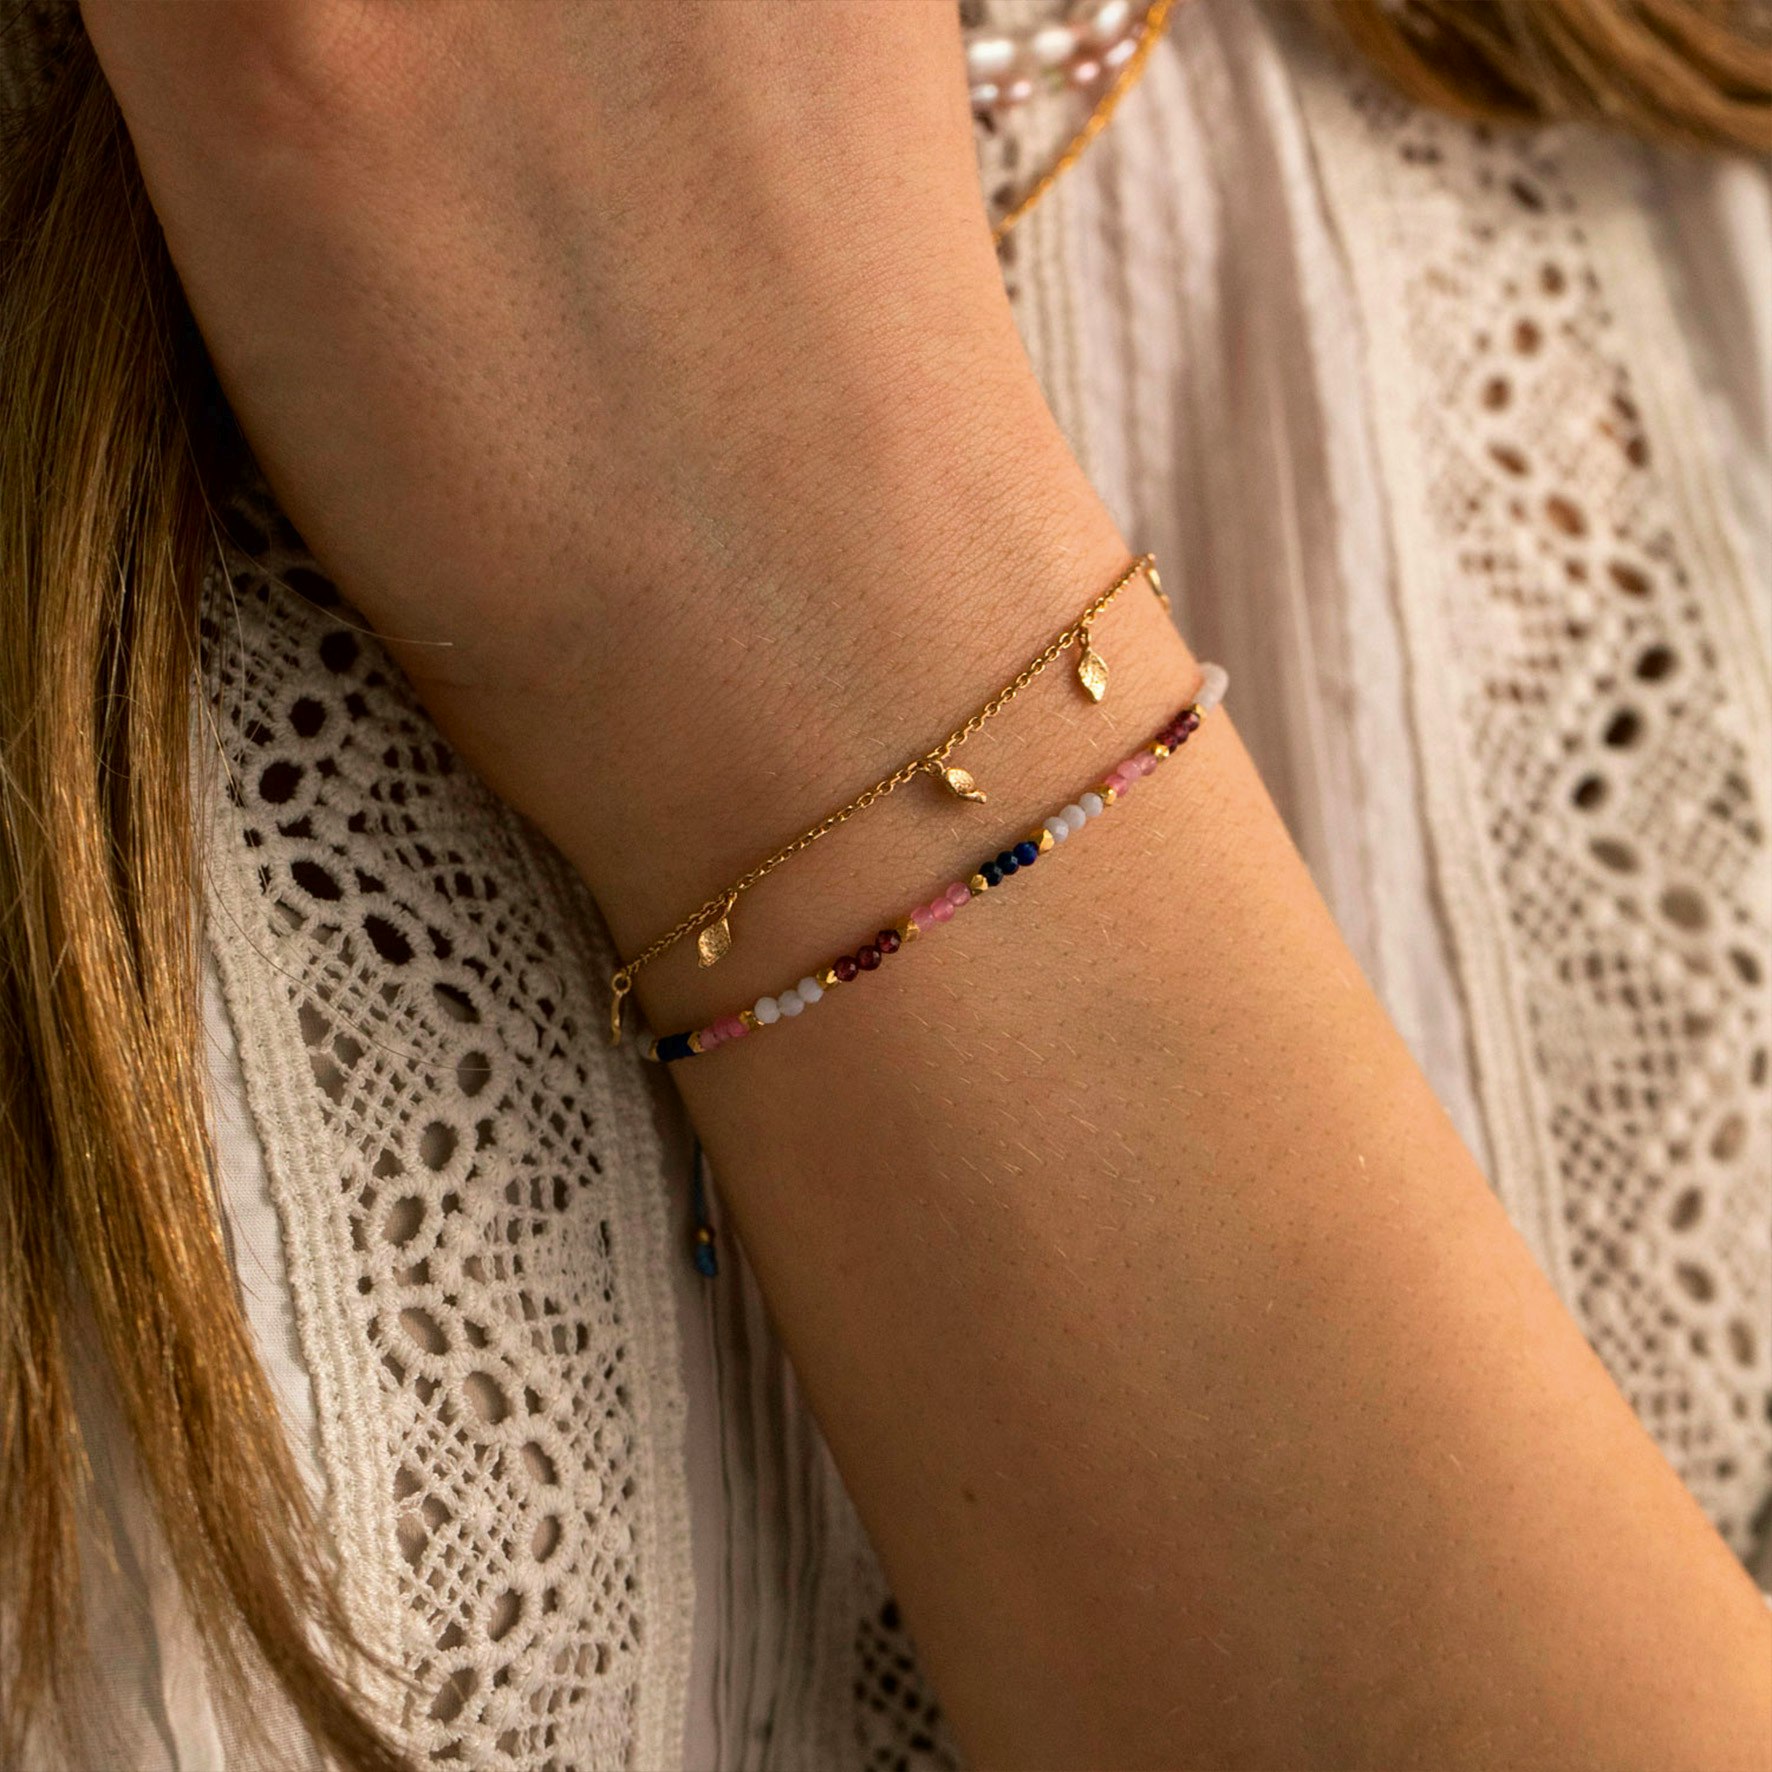 Tout Petit Ile De L'Amour Bracelet from STINE A Jewelry in Goldplated Silver Sterling 925